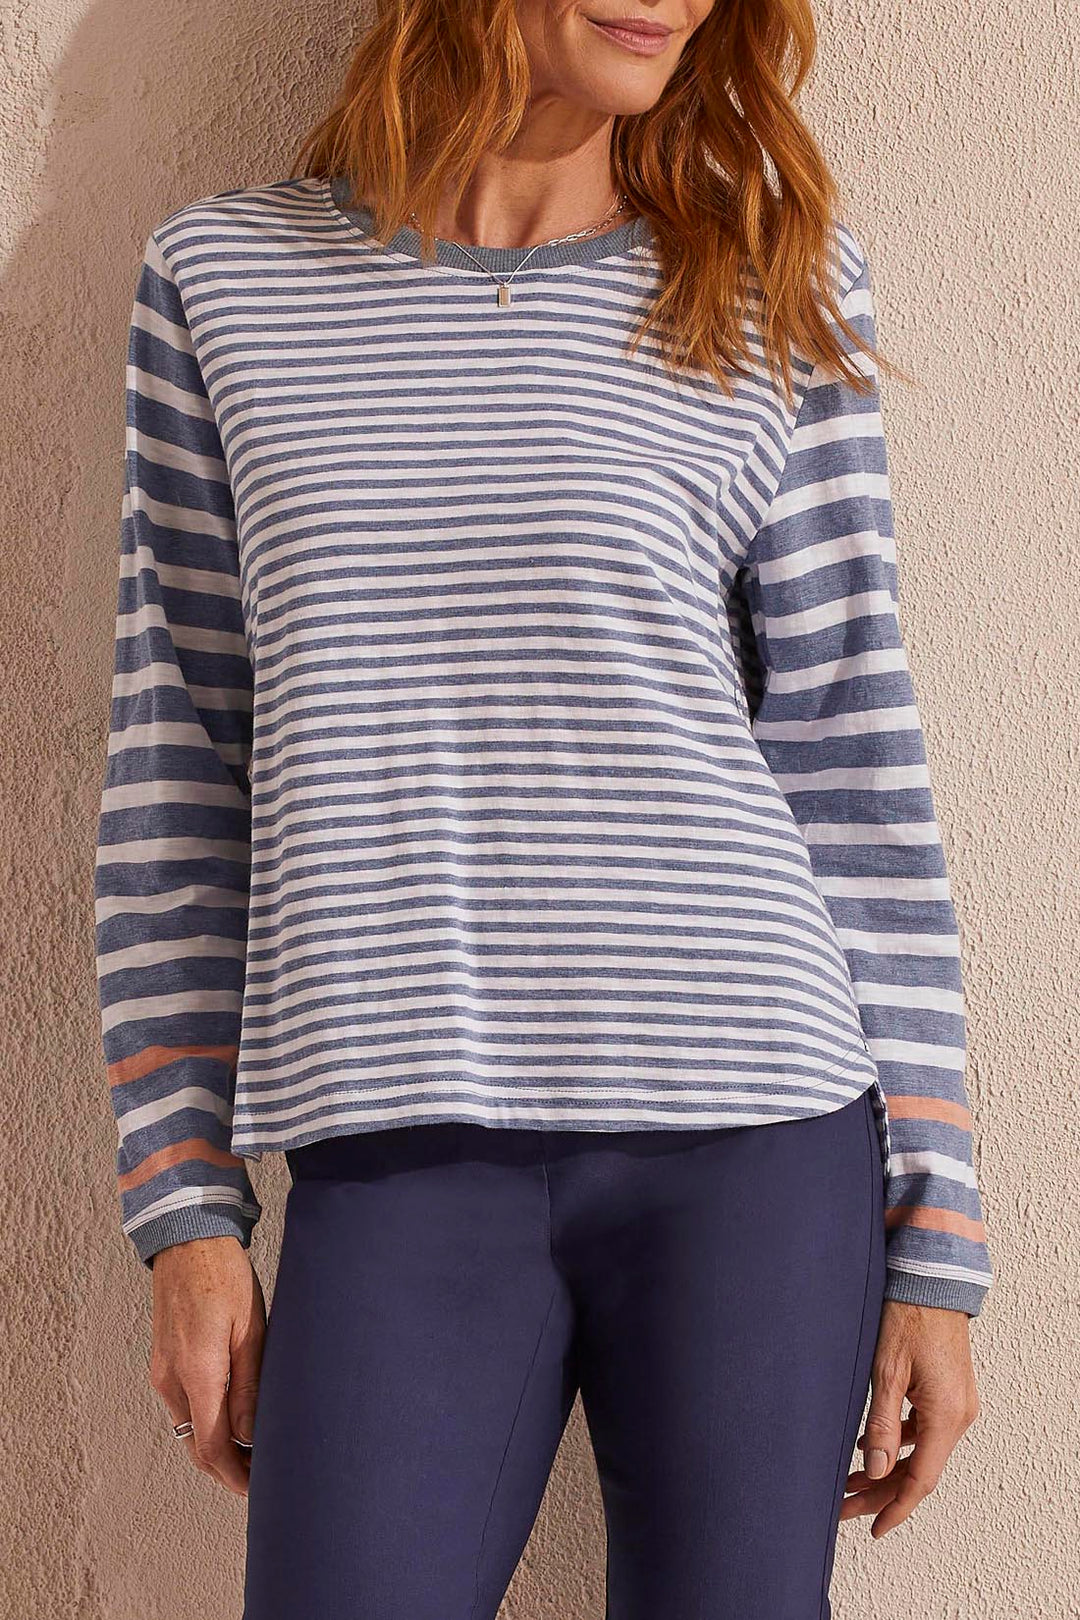 LONG SLEEVE STRIPED CREW NECK TOP W/COMBO CHAMBRAY - BLUE/WHITE